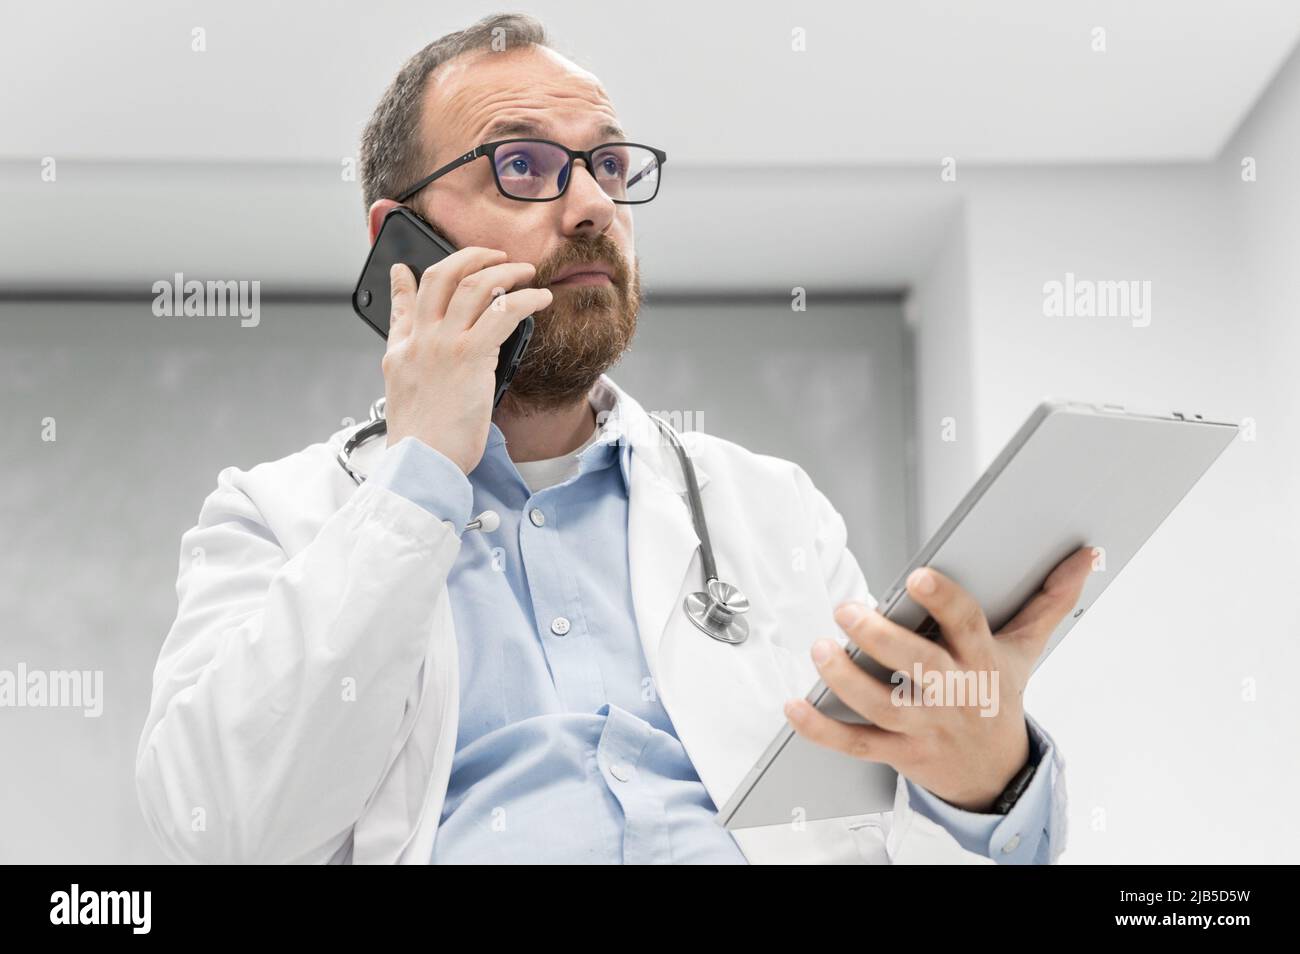 Doctor in office talking on phone. High quality photography. Stock Photo